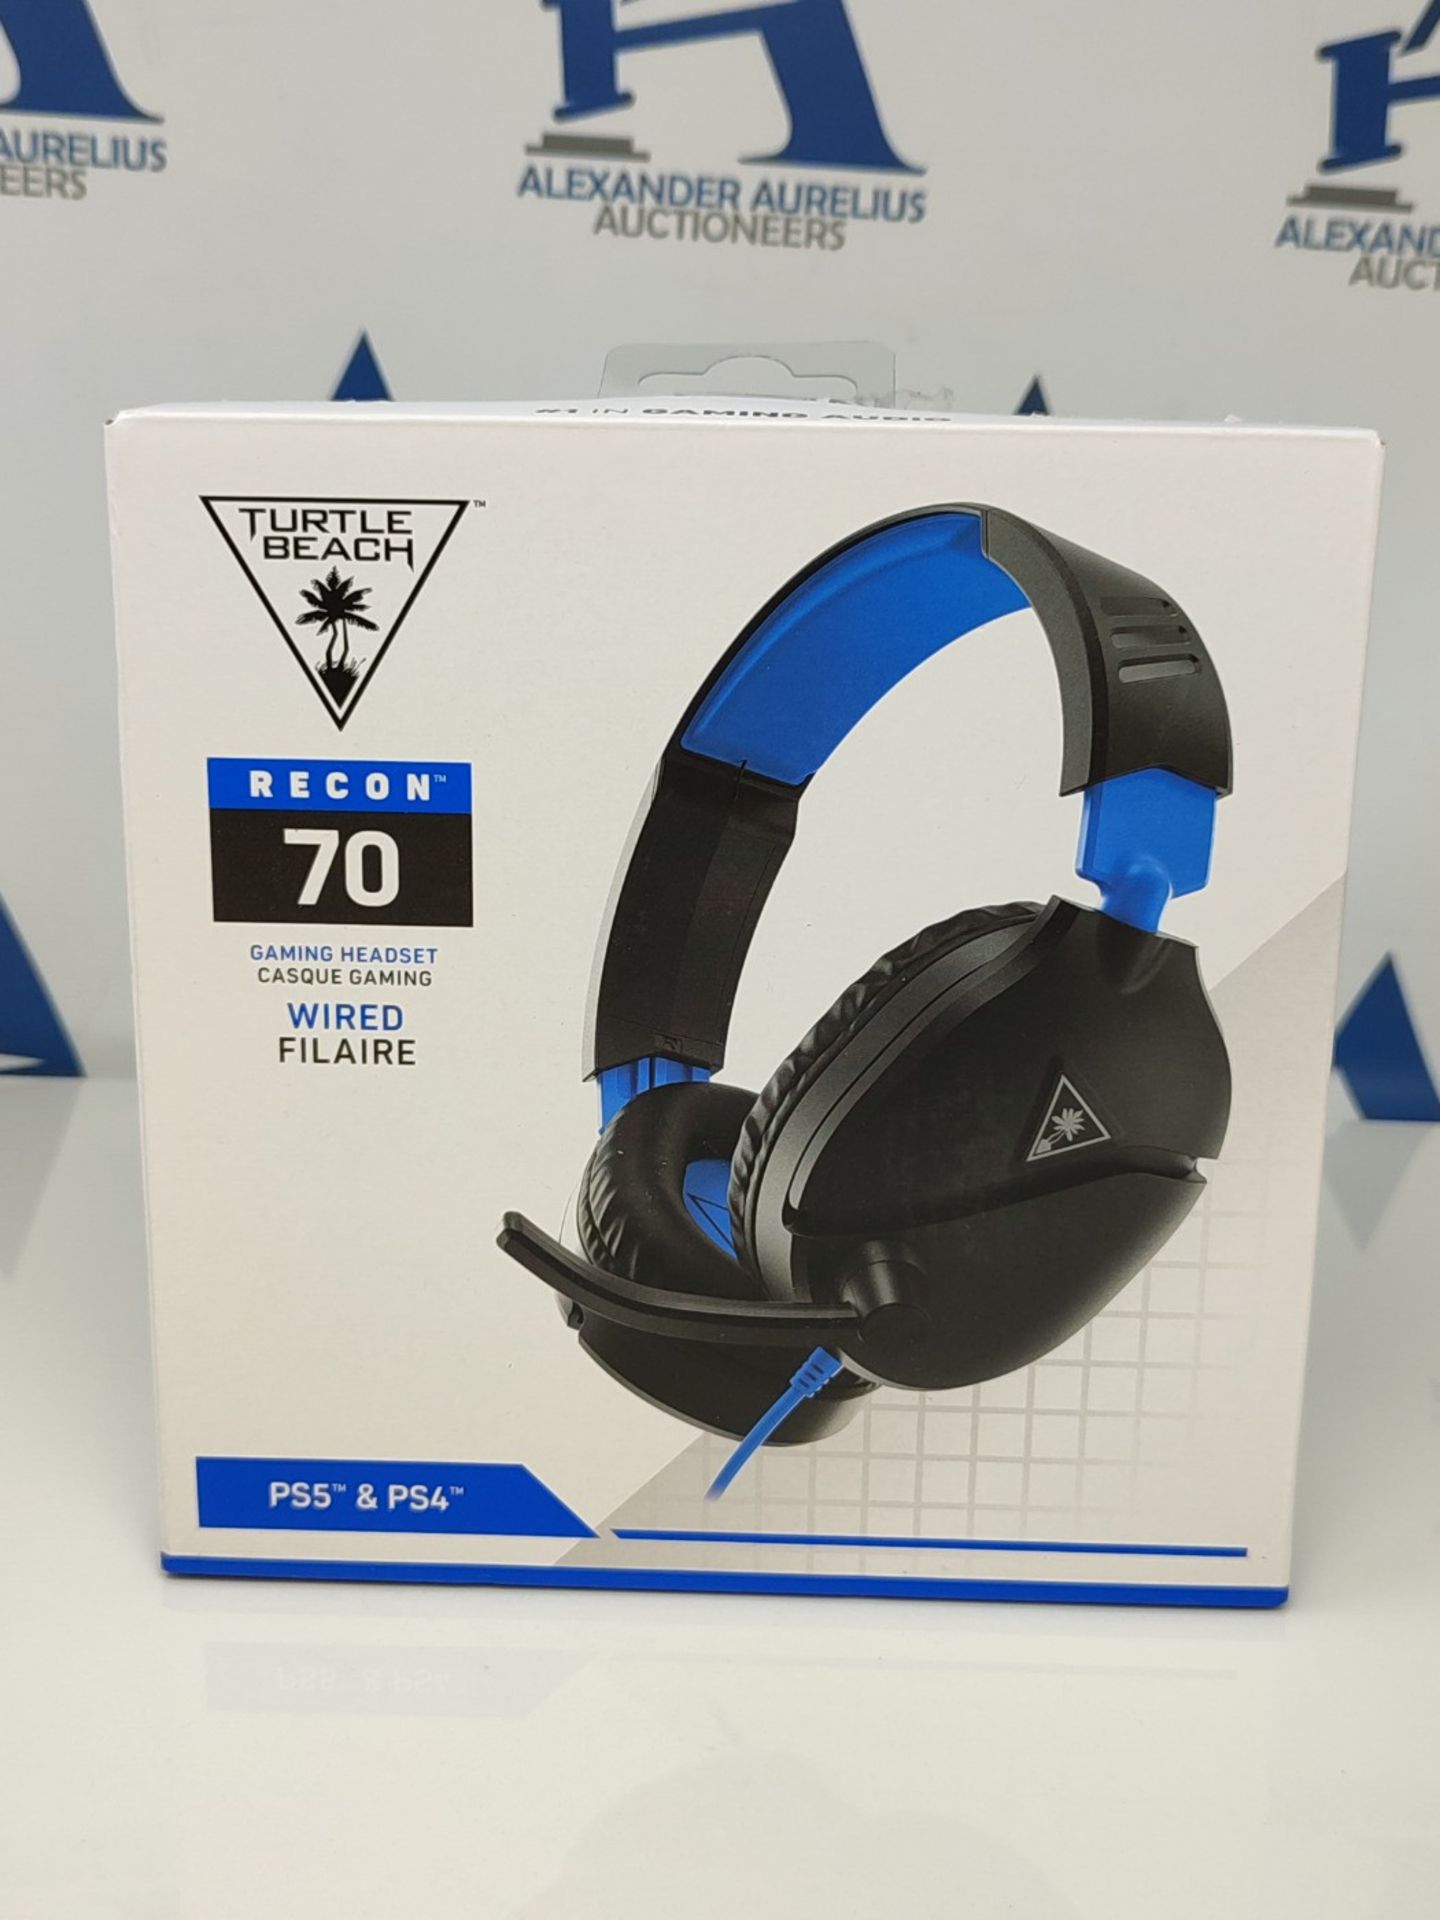 Turtle Beach Recon 70P Gaming Headset - PS4, PS5, Xbox One, Nintendo Switch, and PC - Image 2 of 6